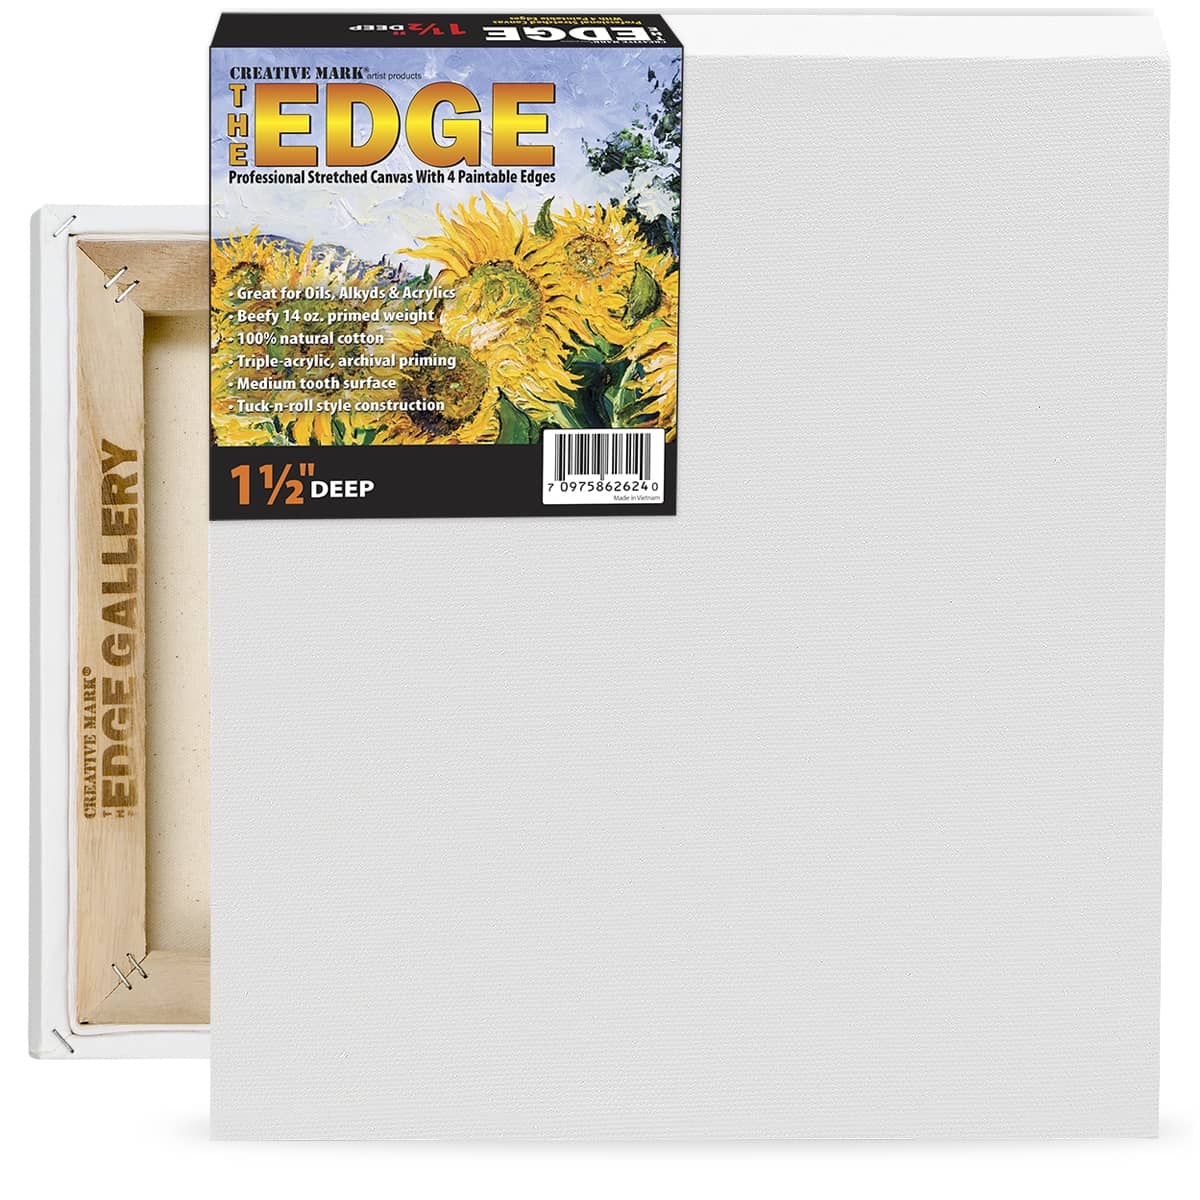 The Edge All Media Cotton Deluxe Stretched Canvas 11/16 Deep